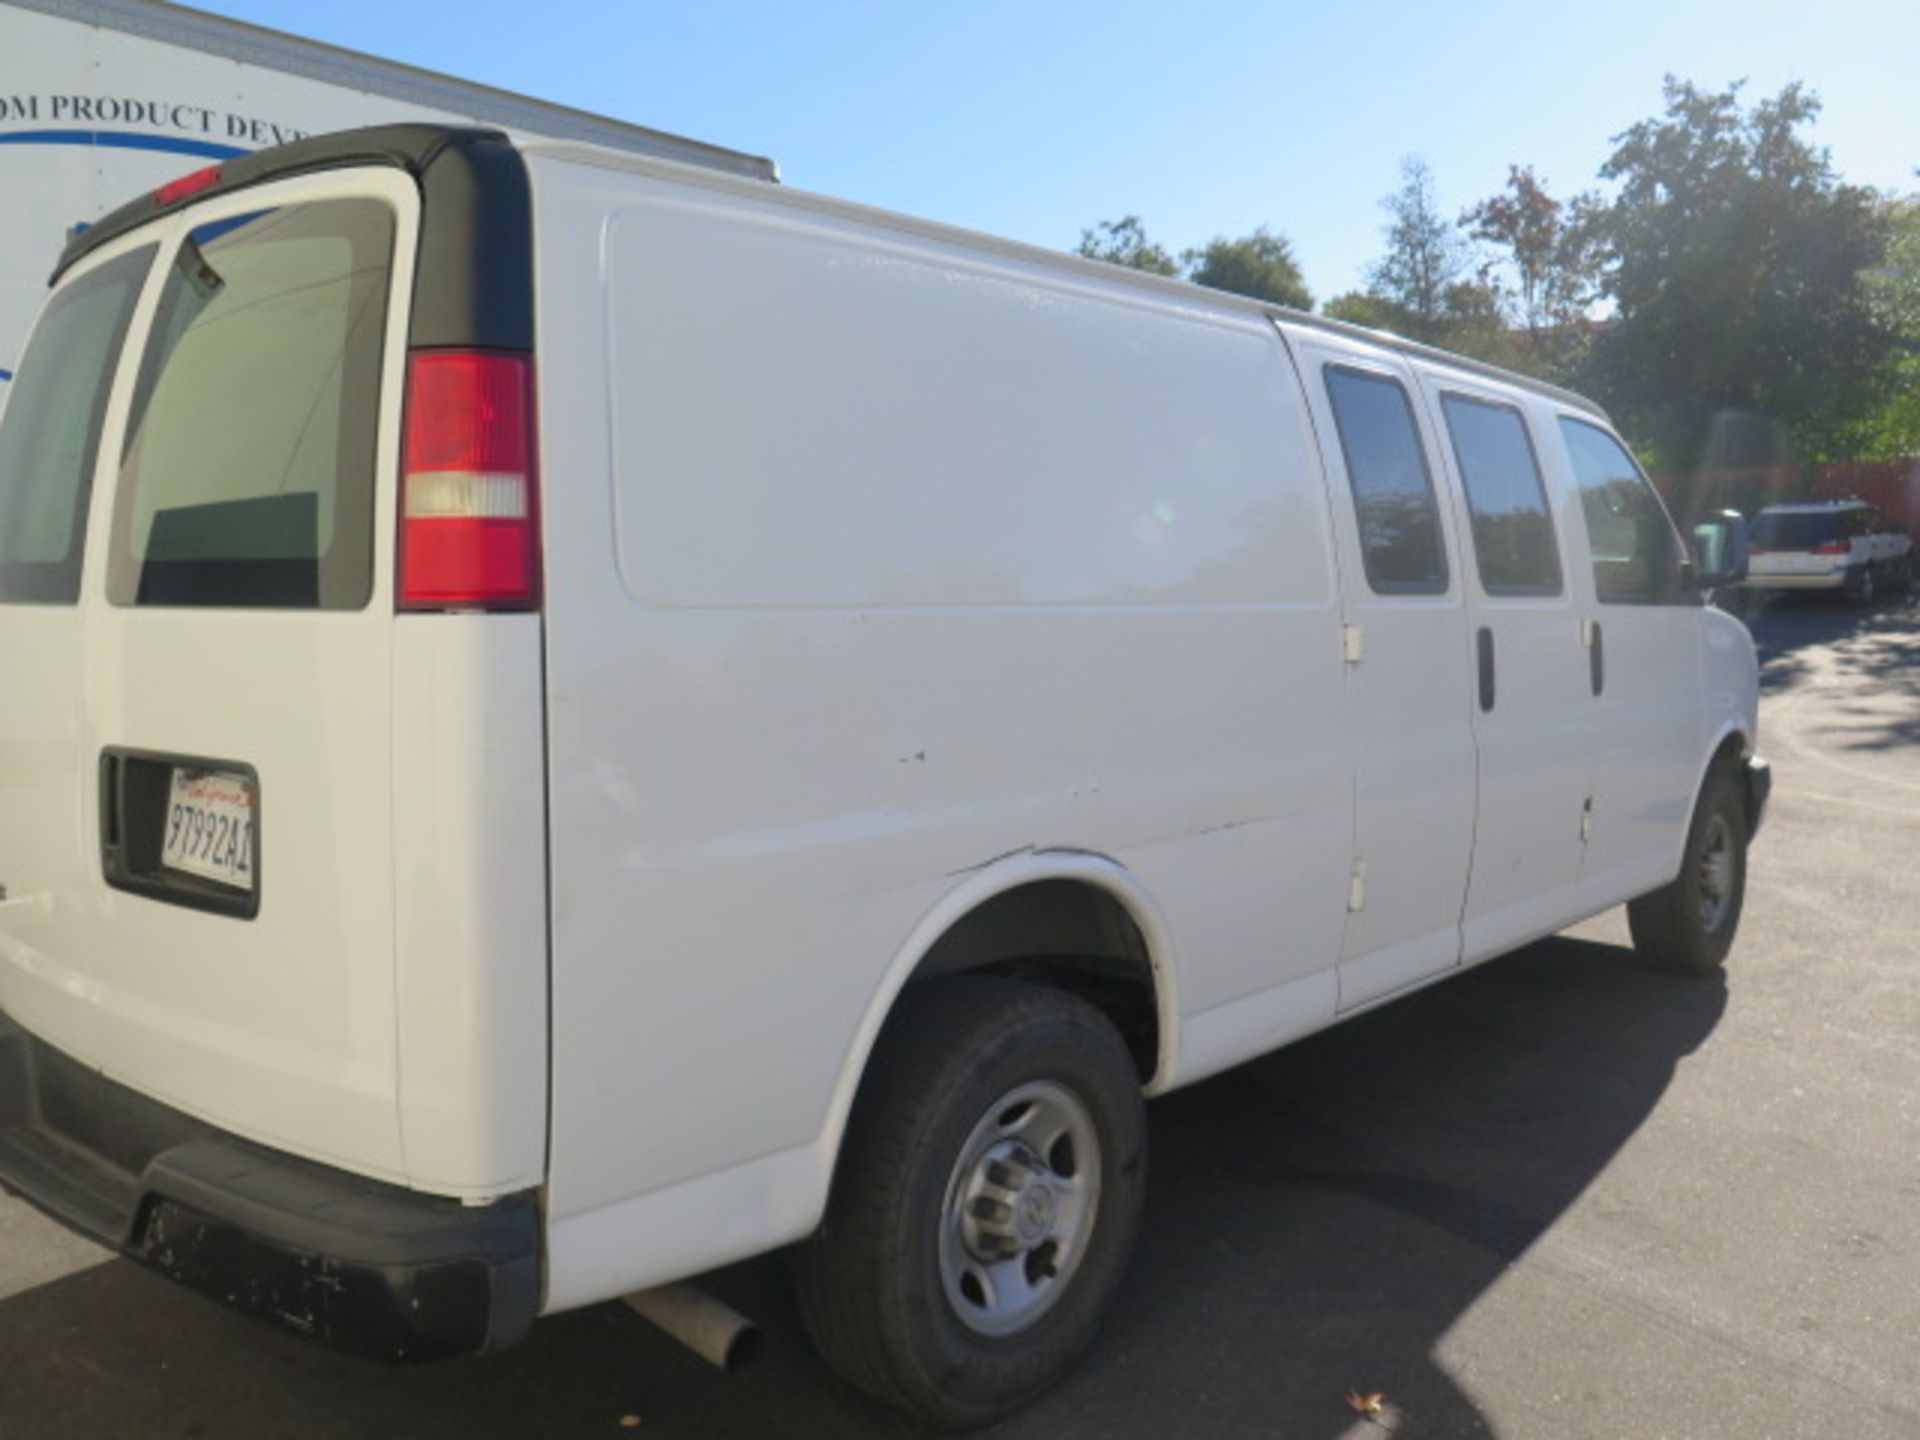 2007 Chevrolet Cargo Van Lisc #97992A1 w/Gas Engine, Auto Trans, AC, 271,713 Miles, SOLD AS IS - Image 6 of 24